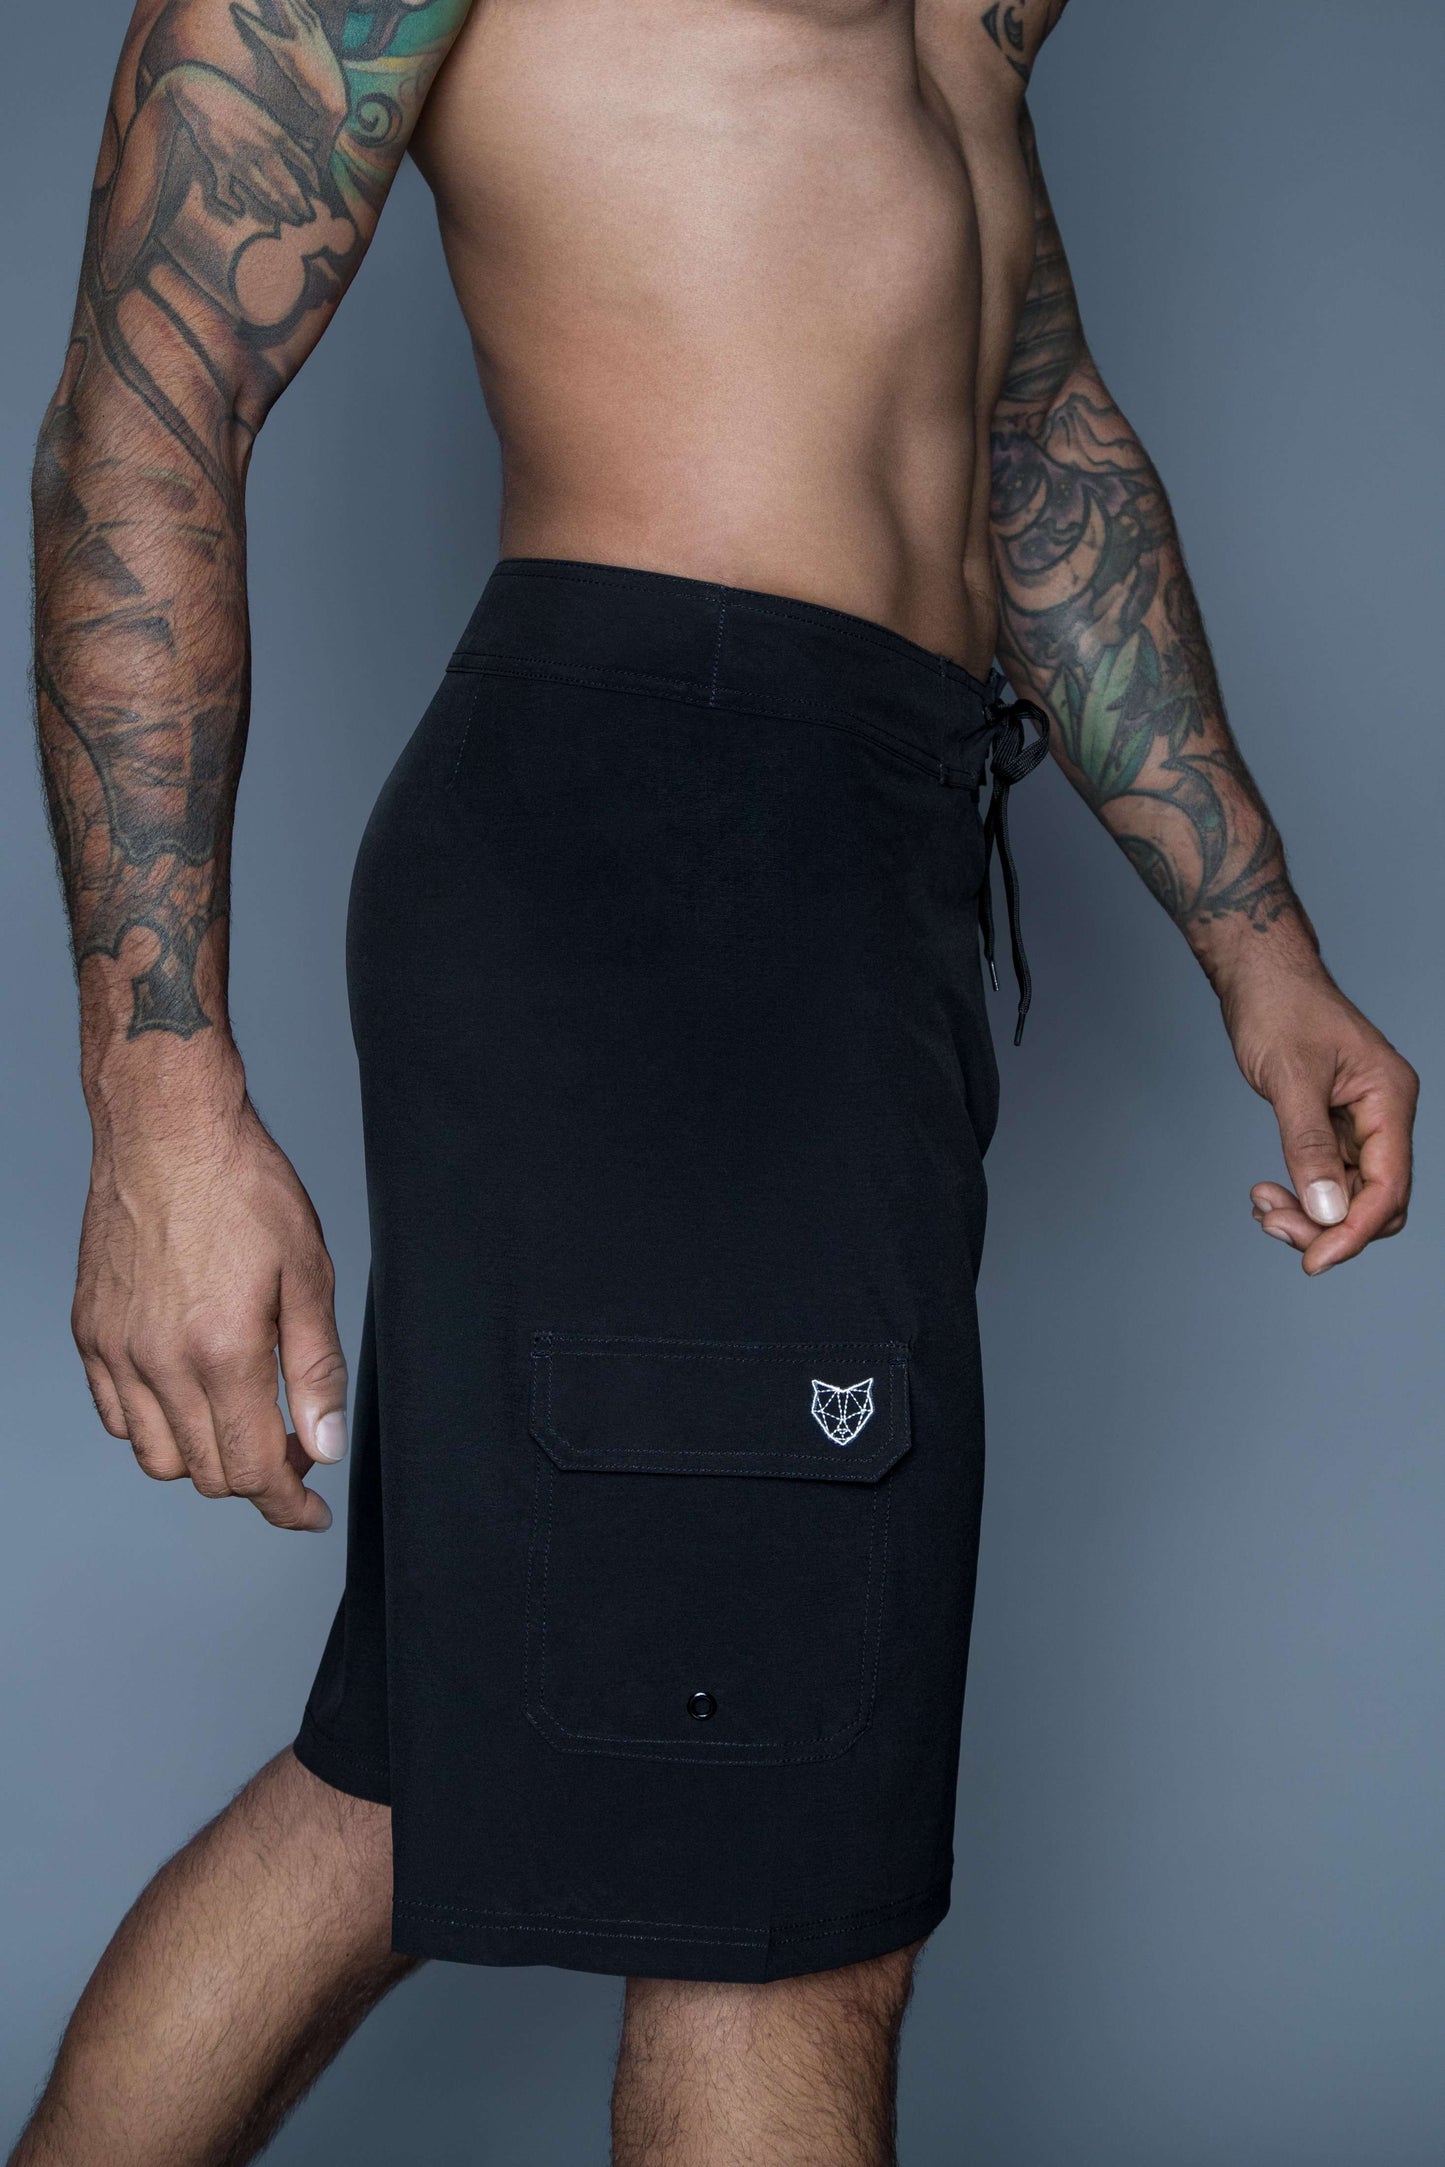 The Navas Lab Zod boardshorts for tall guys in black. The perfect boardshorts for tall men.